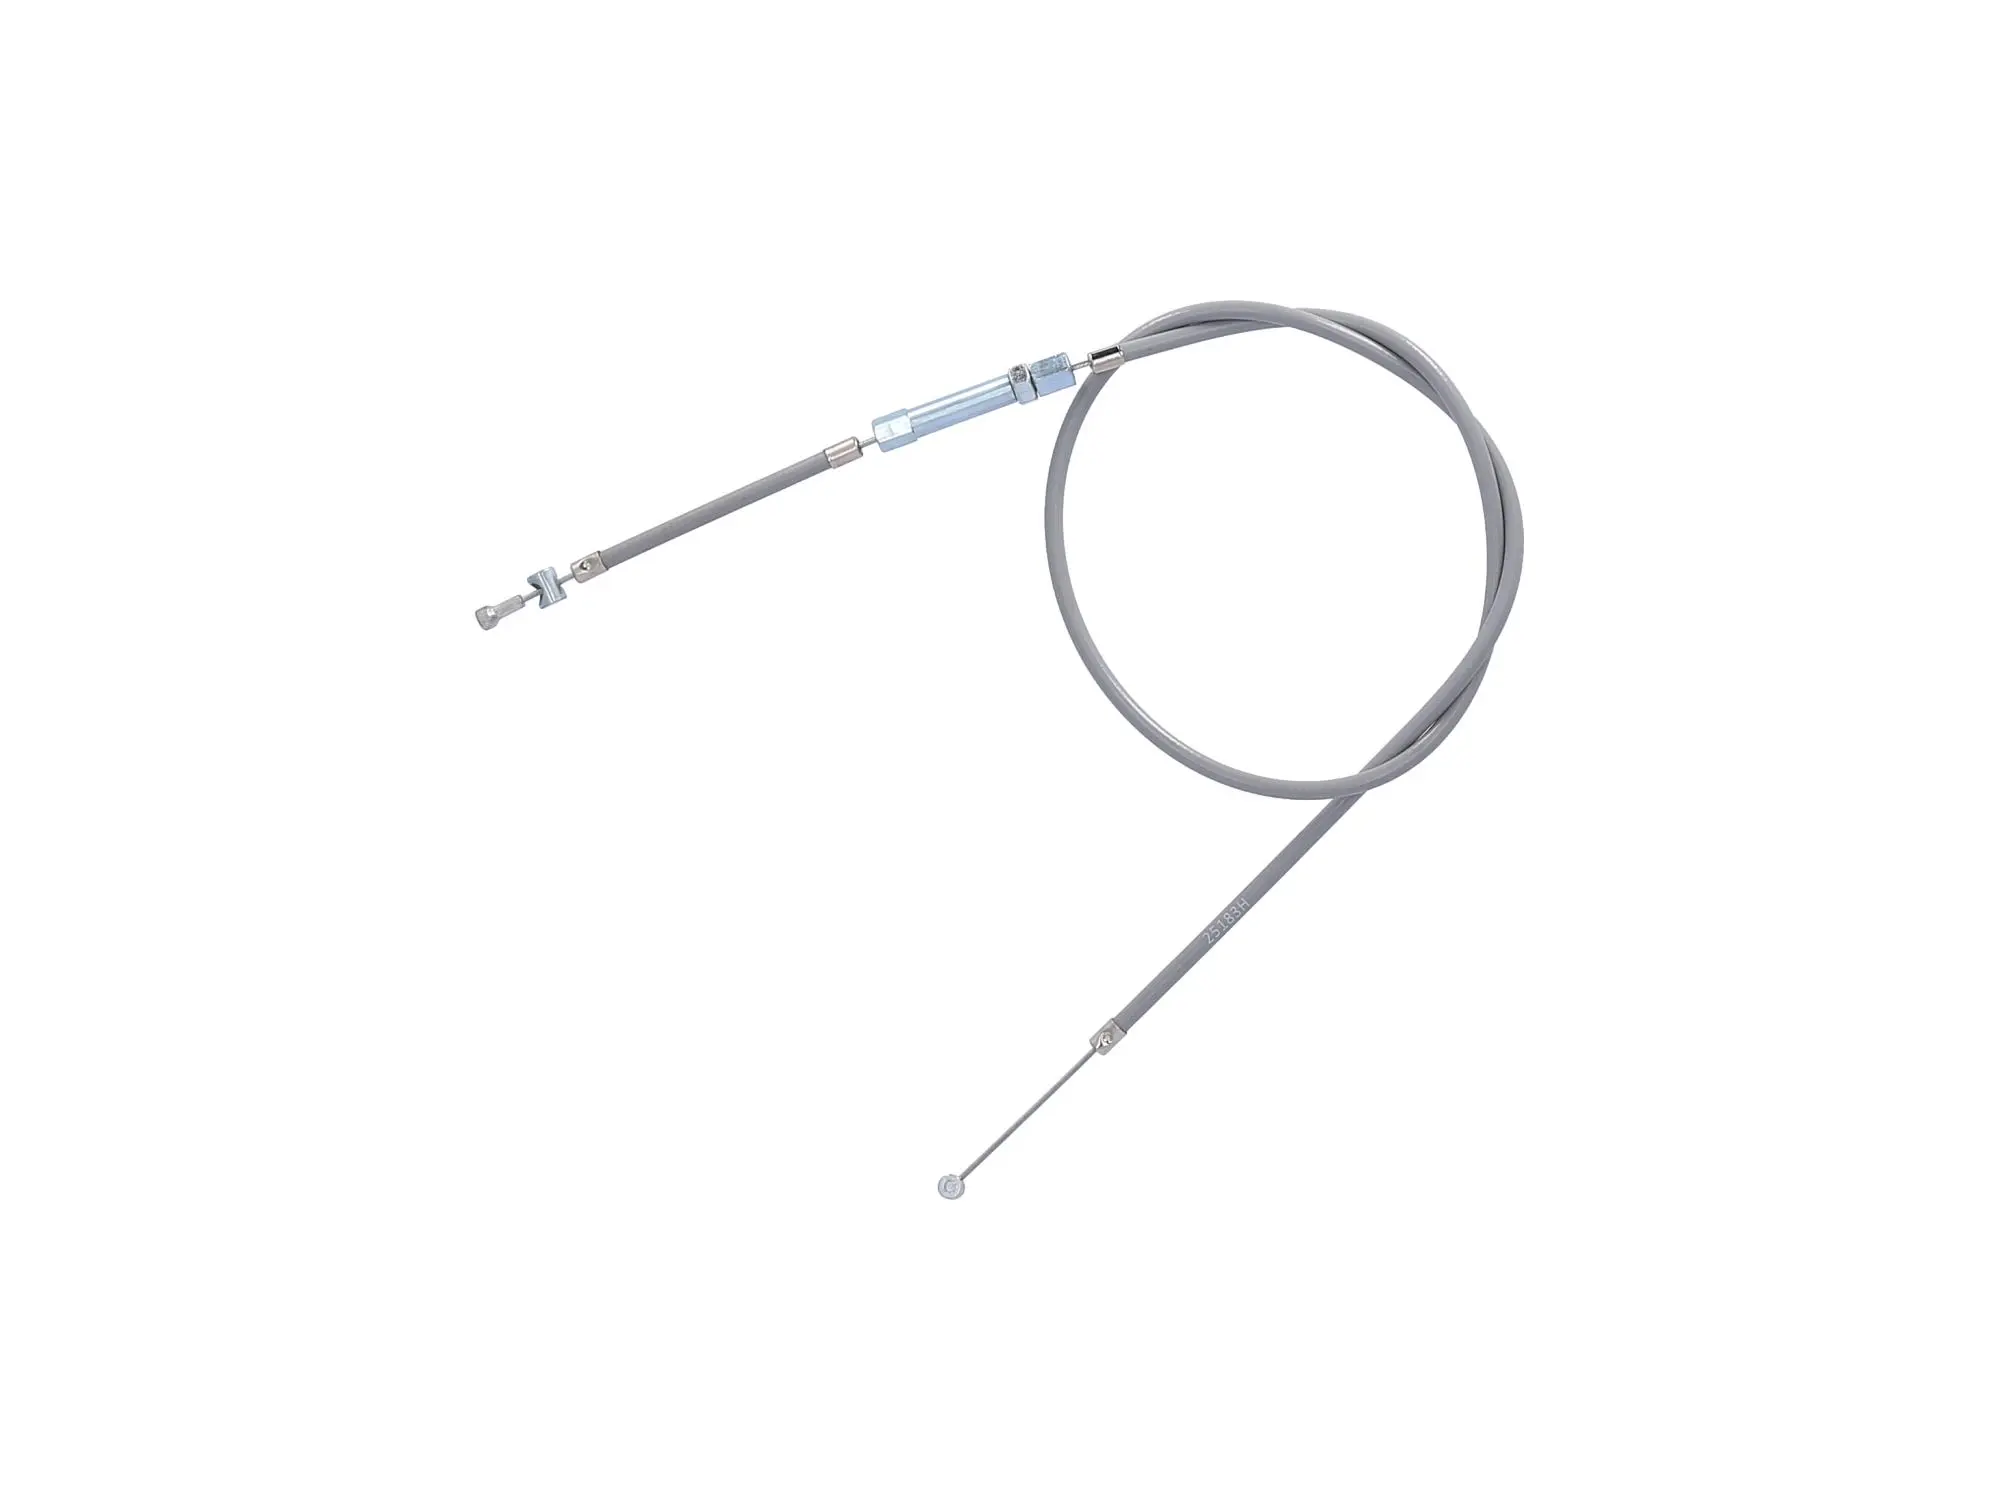 Gear cable left, gray - Simson KR51/1 Schwalbe, Item no: 10068734 - Image 1